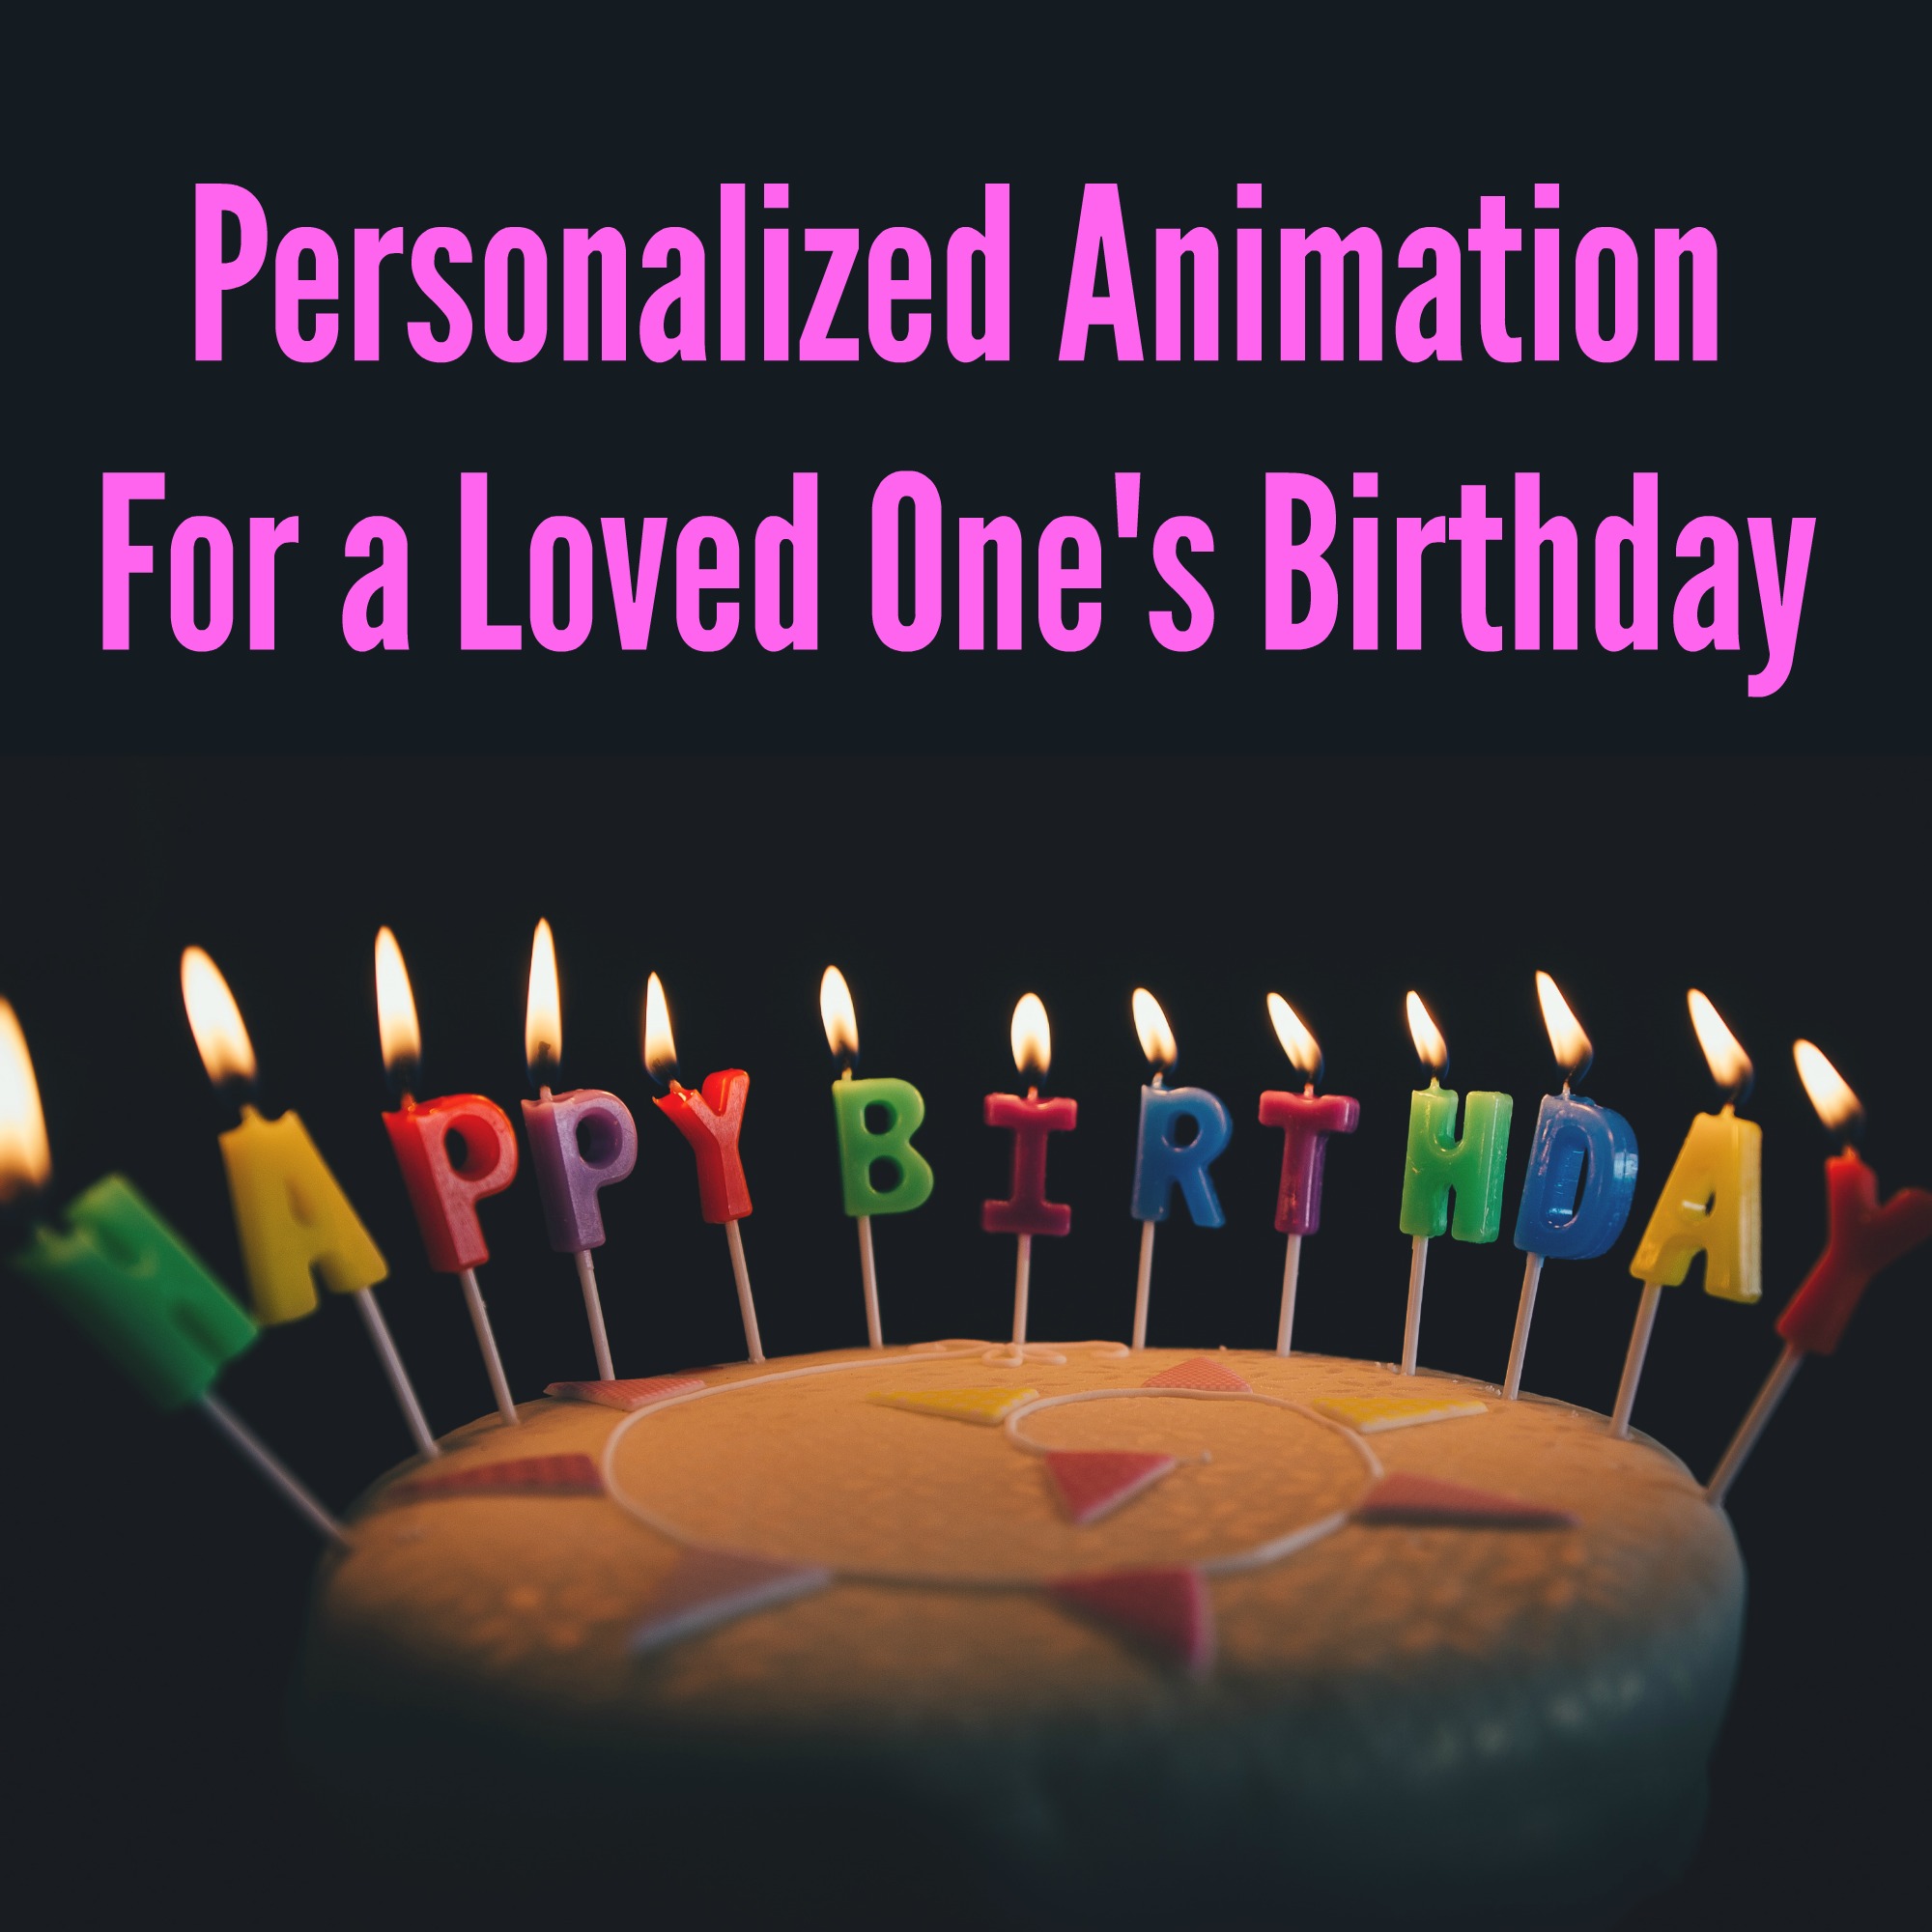 Personalized Animation For a Loved One's Birthday